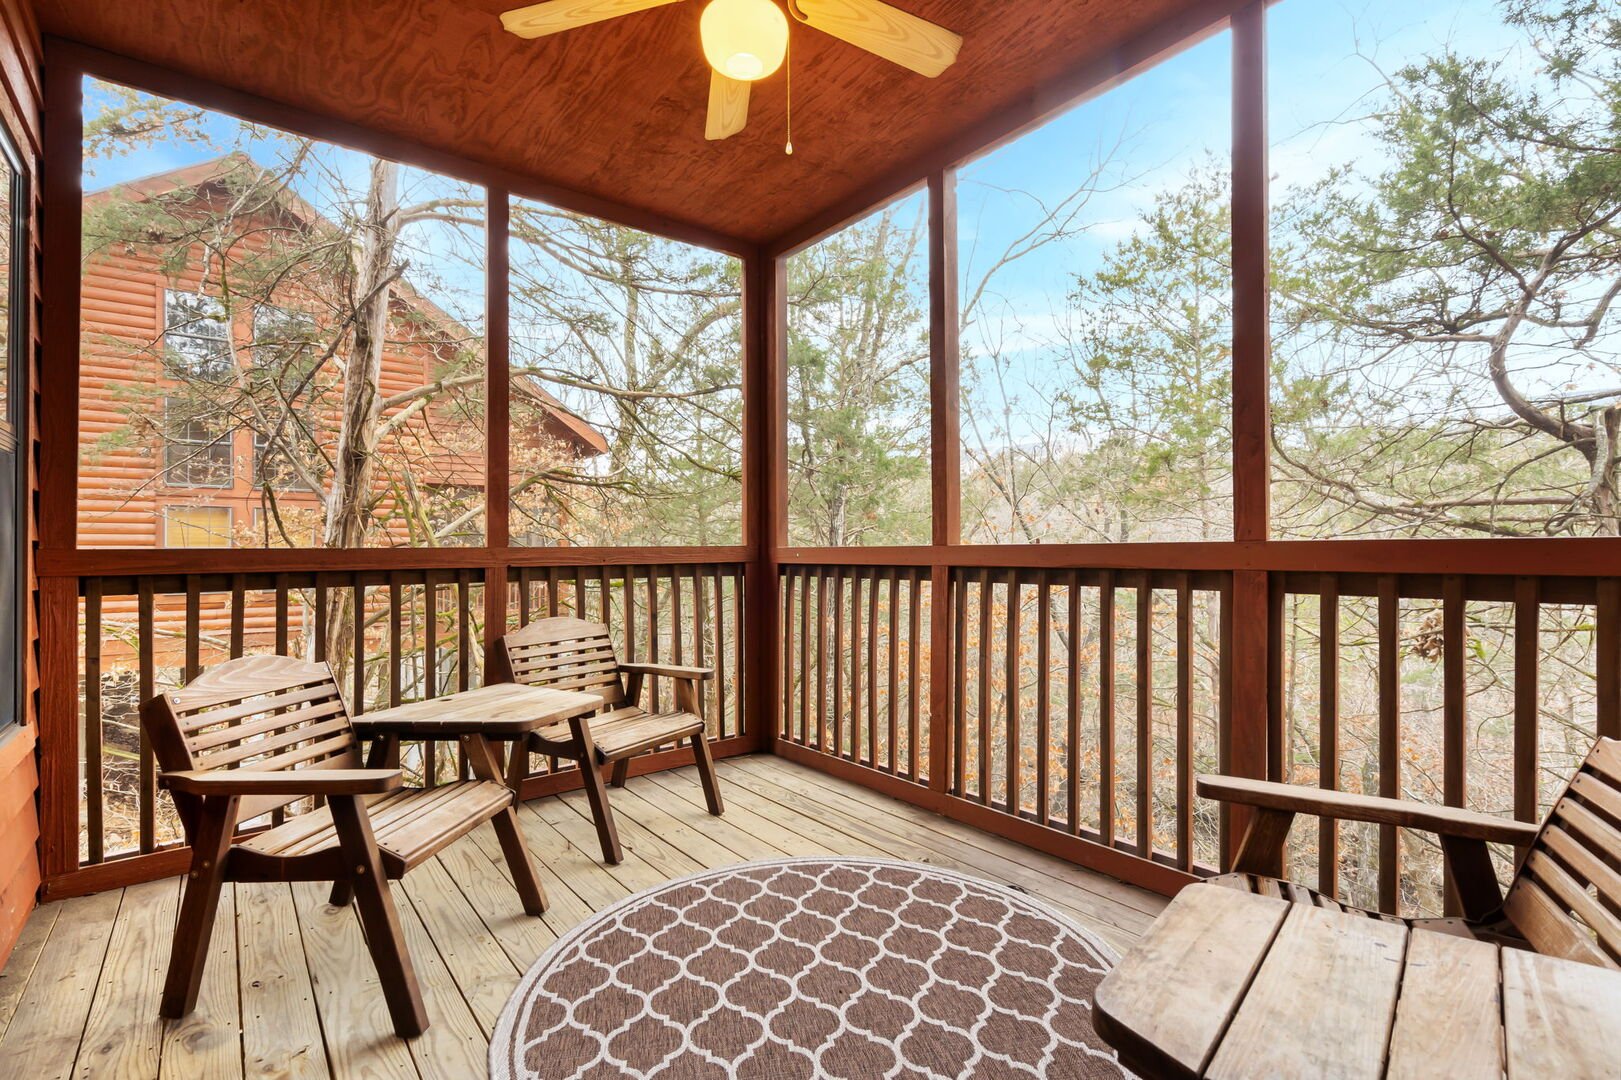 2 Bed, 2 Bath Cabin with Fireplace & Screened Balcony